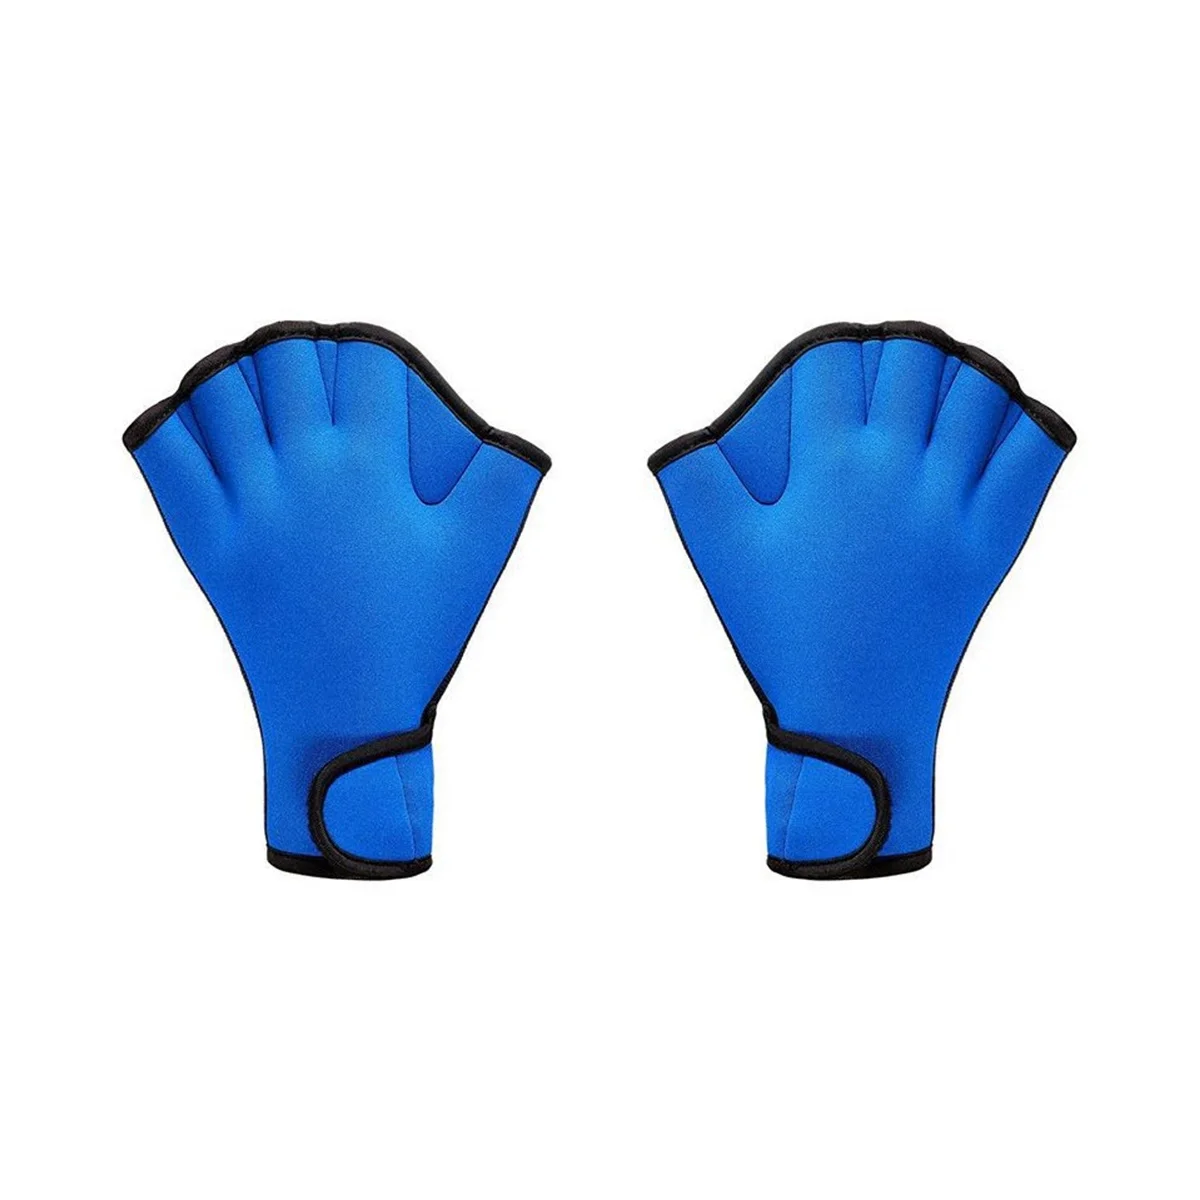 

Swimming Training, Diving Equipment, Anti-Slip Semi-Fingered Gloves for Adults and Children Swimming Training,Blue+L